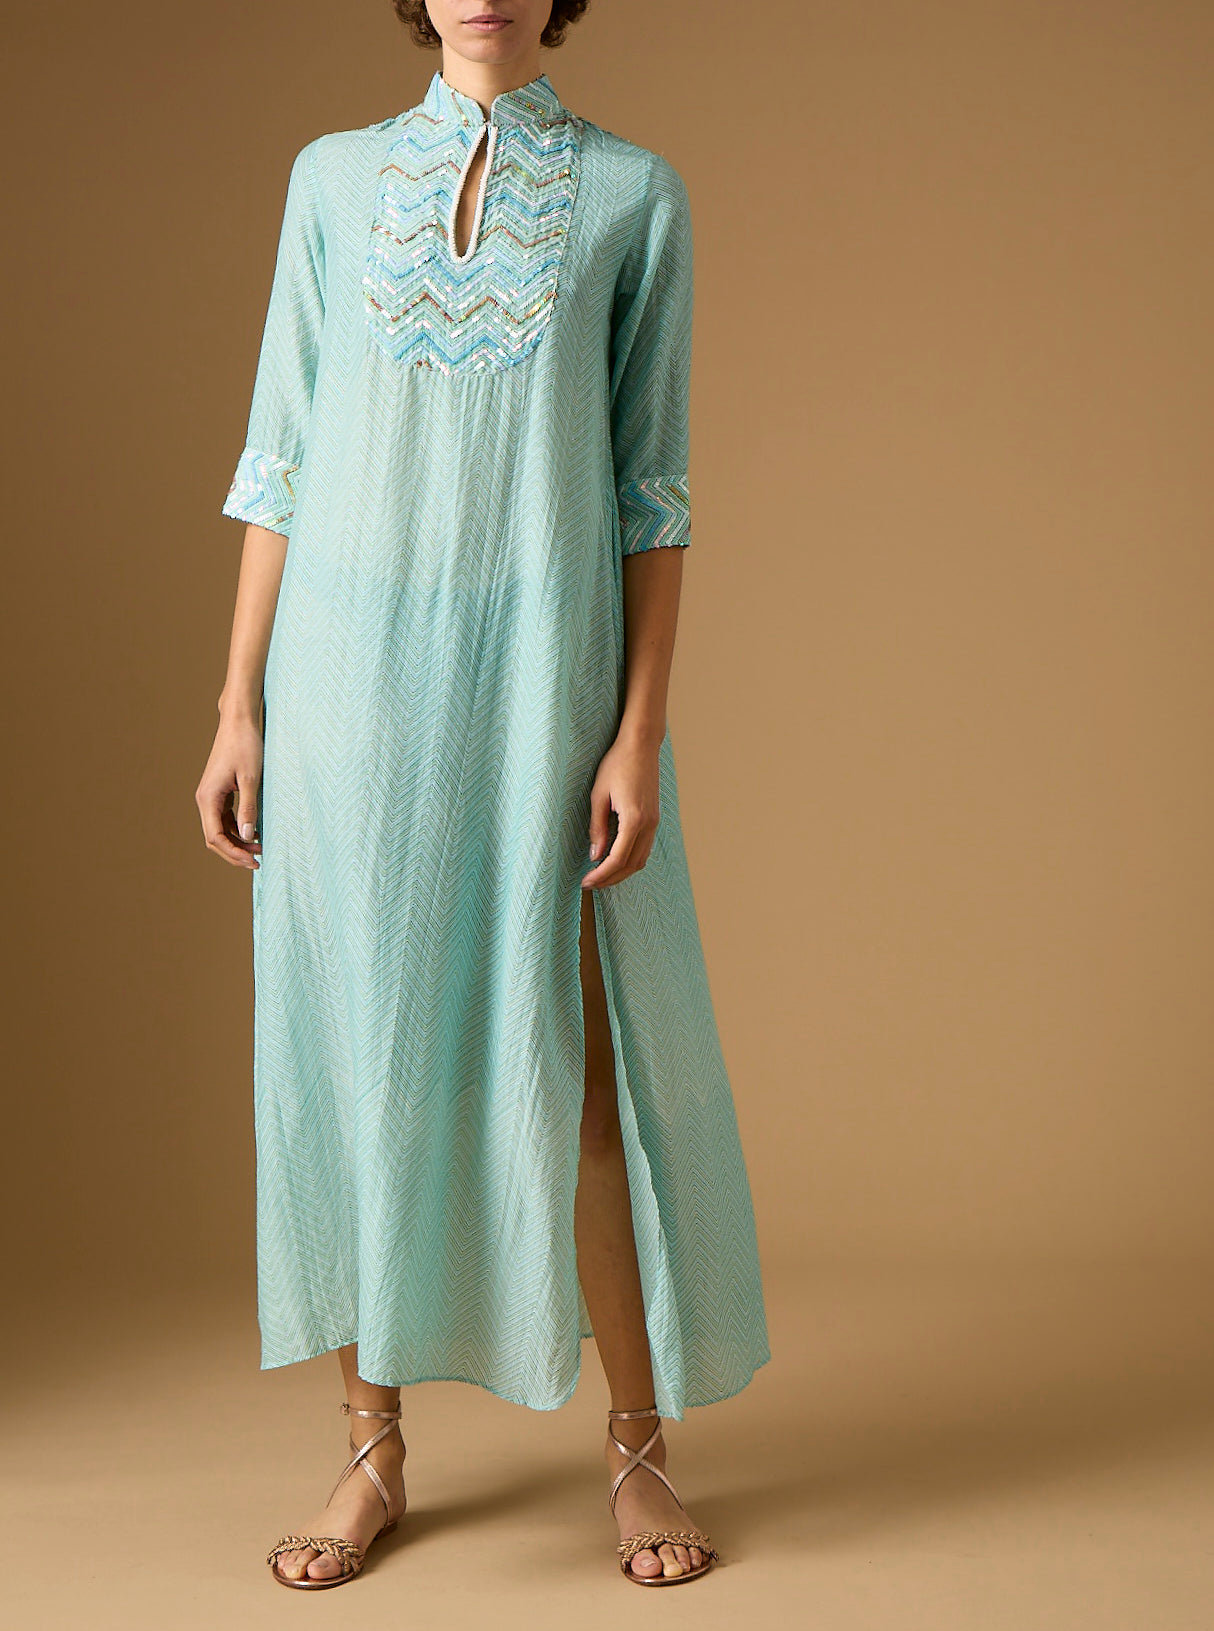 Angelica Glitter Zig-zag Embroidery Mint Stand-Up Collar Long Dress by Thierry Colson